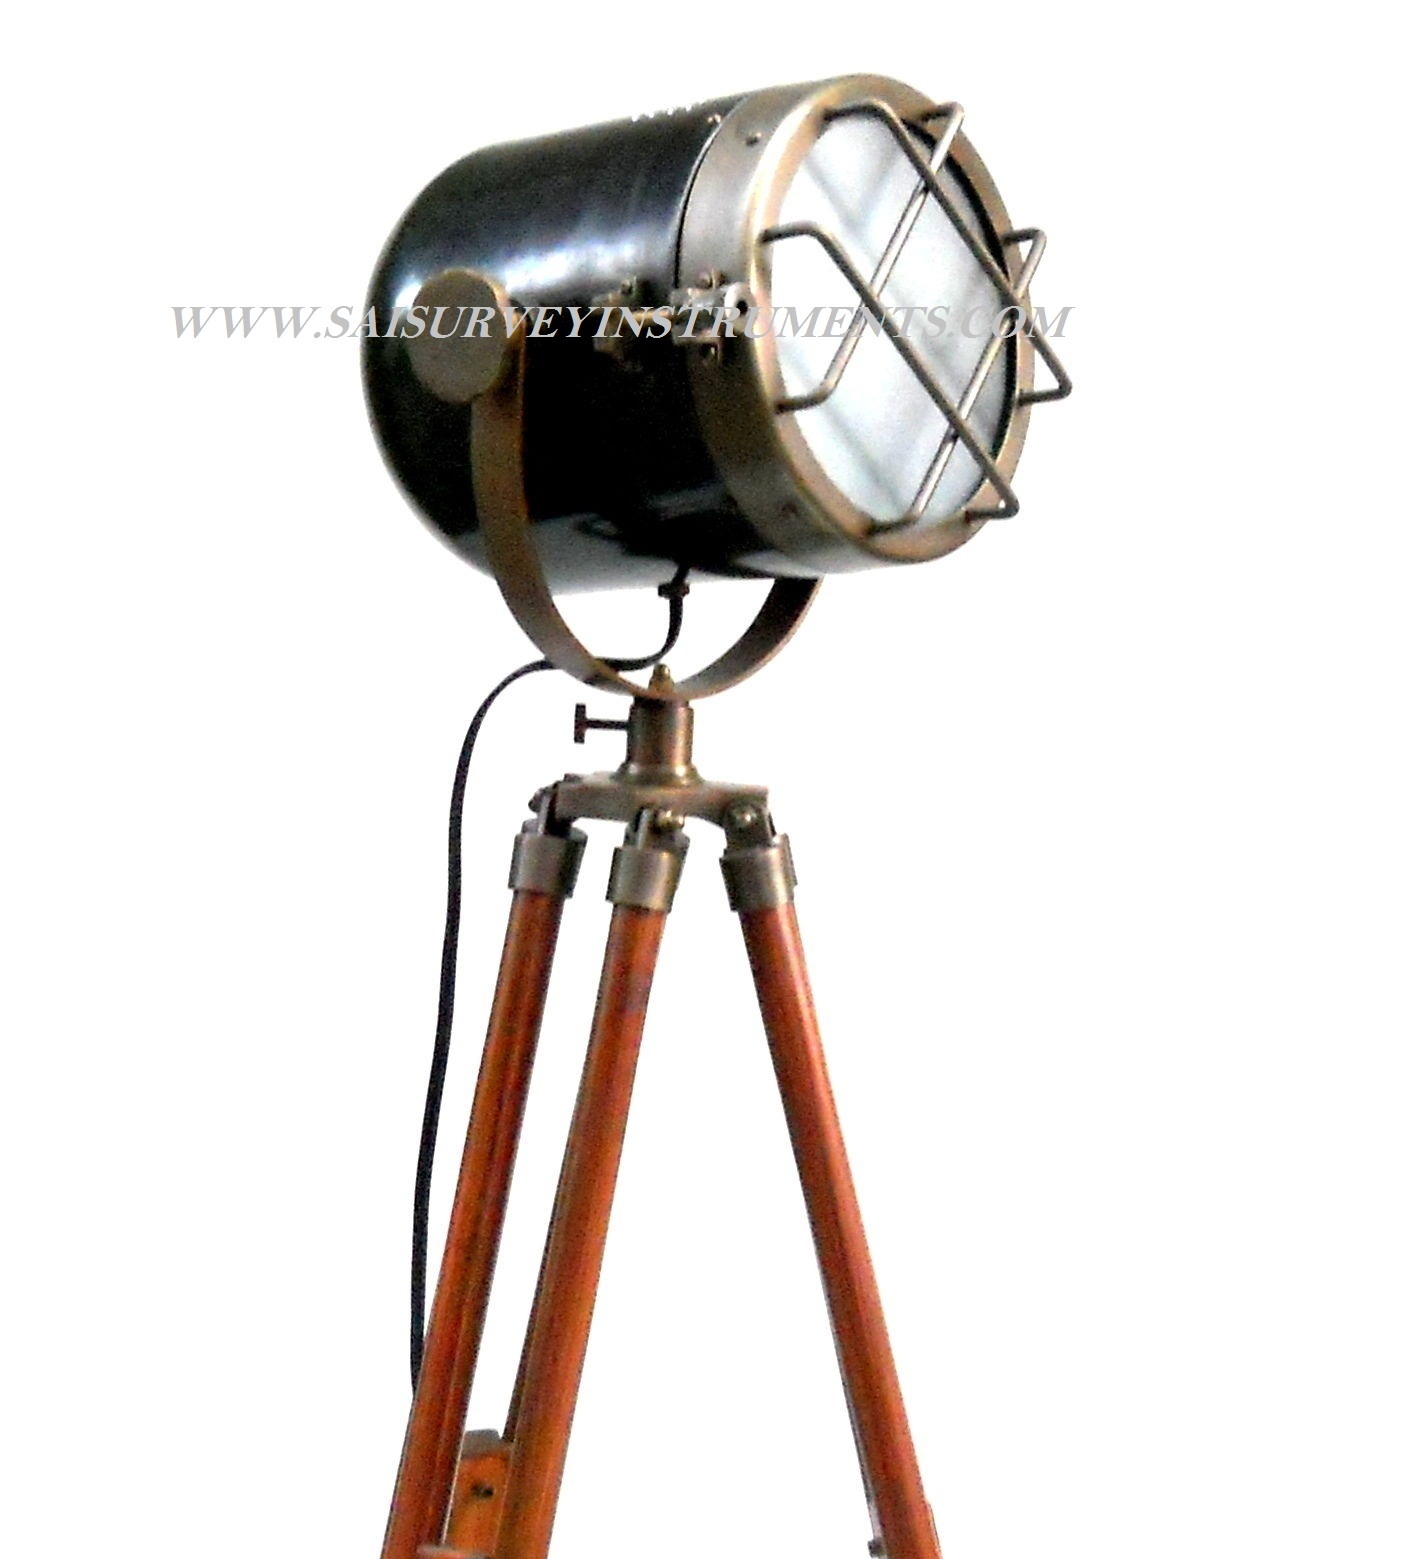 Black & Brown Antique Nautical Search Light with Wooden Tripod Stand ~ Collectible Model Spotlight